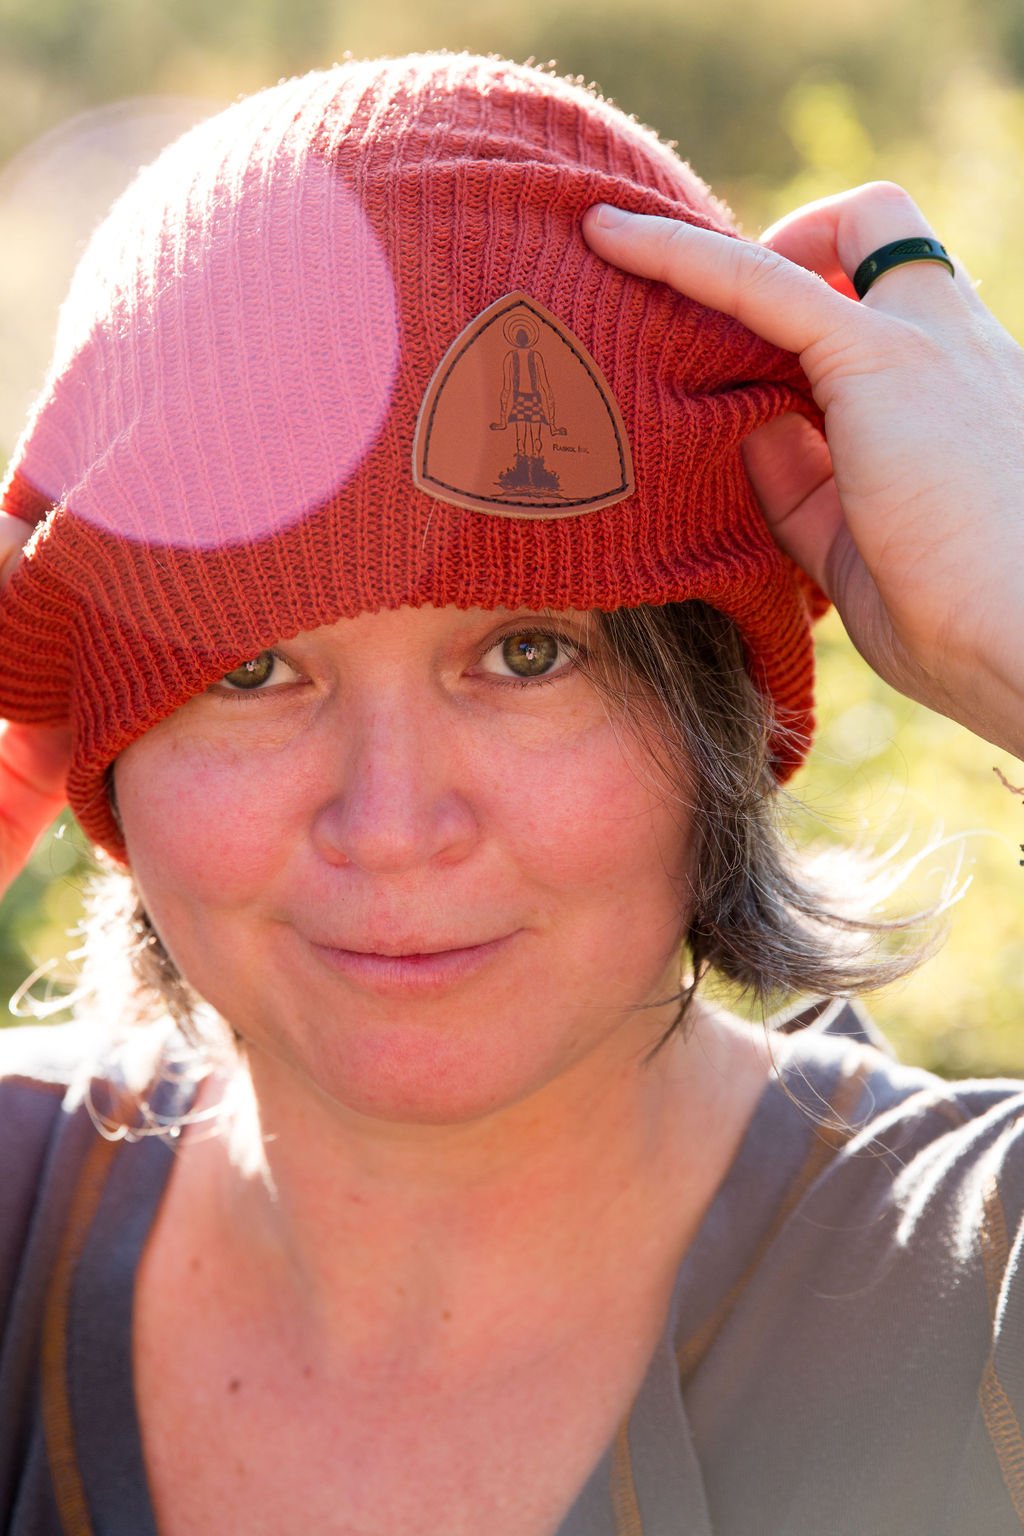  Meagan, a young woman with brown hair and light colored eyes, wears a red beanie hat with a brown patch with the Raskol - a strange otherworldly character - on it. She is smiling.  